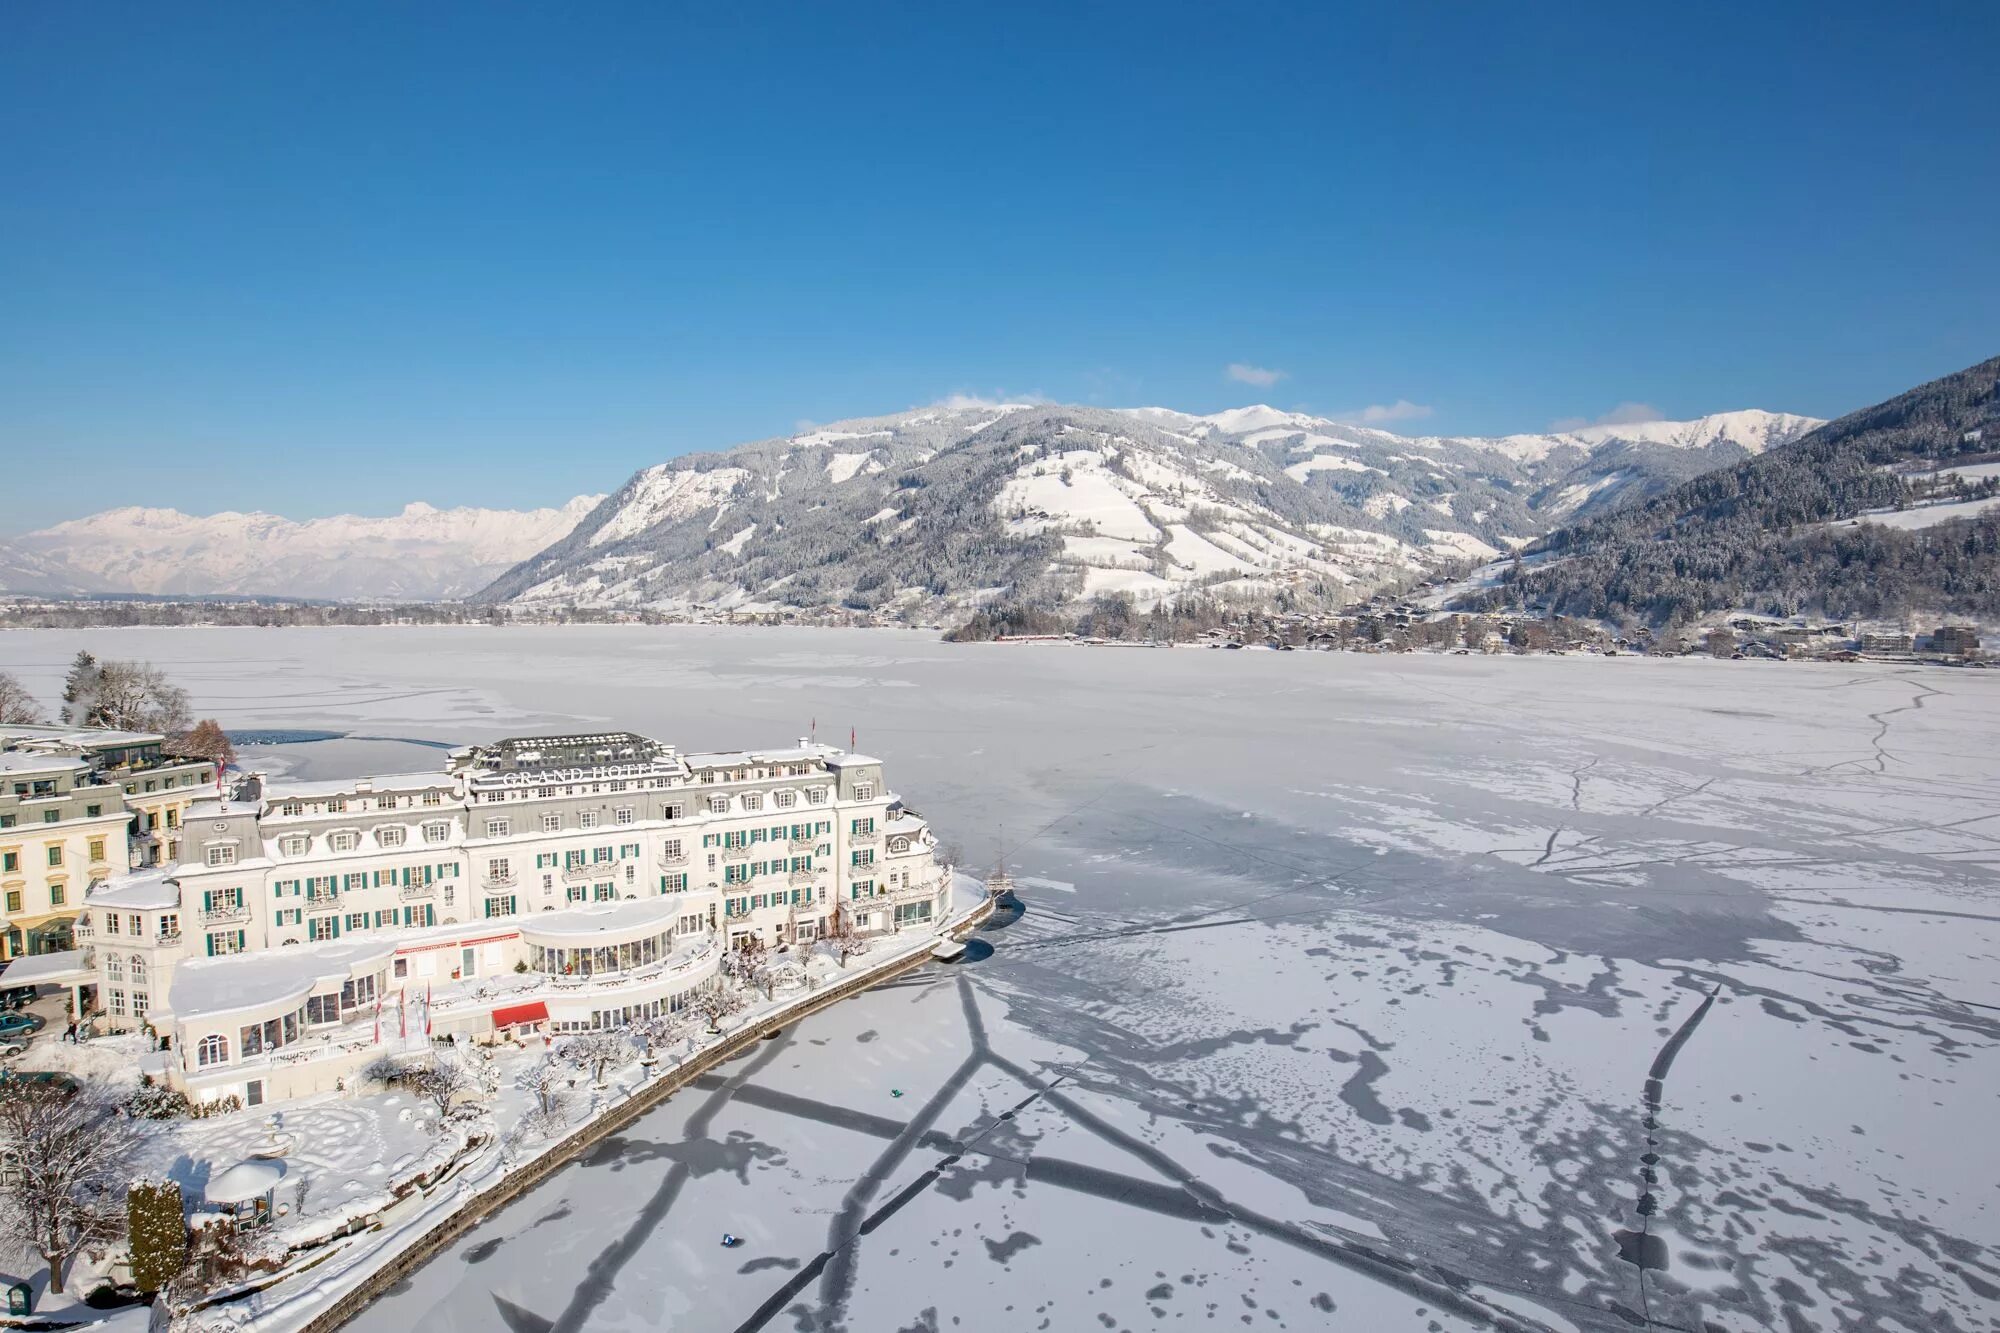 Grand Hotel Zell am see. Austria Zell am see Grand Hotel. Вокзал Zell am see. Озеро цель ам Зее. See ski